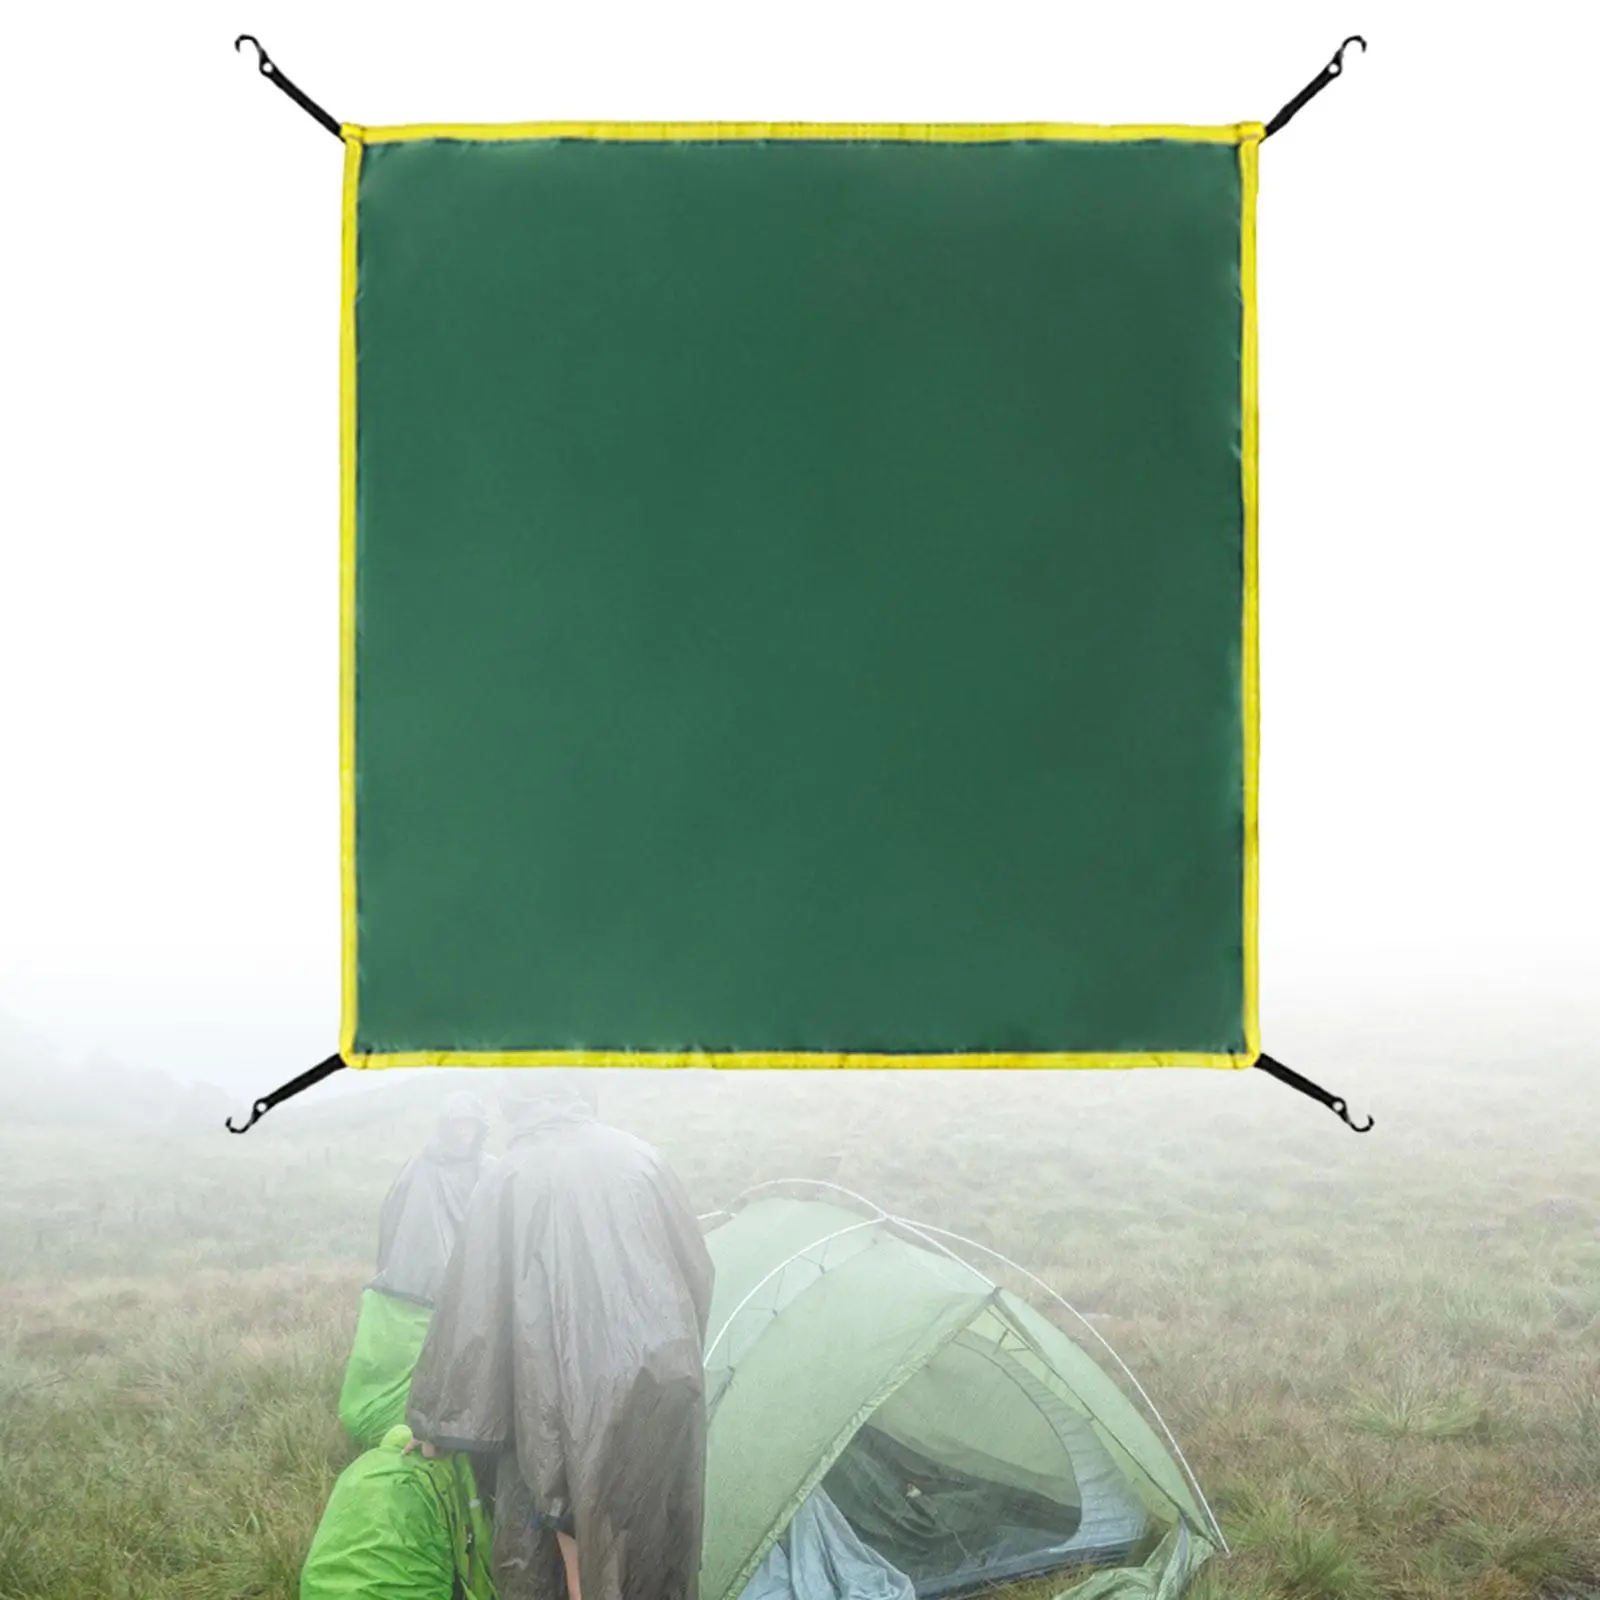 Rainfly Accessory Windproof Sun Protection Fits 3-4 Person Instant Tent Tarp for Outdoor Supplies Backpacking Travel Camping